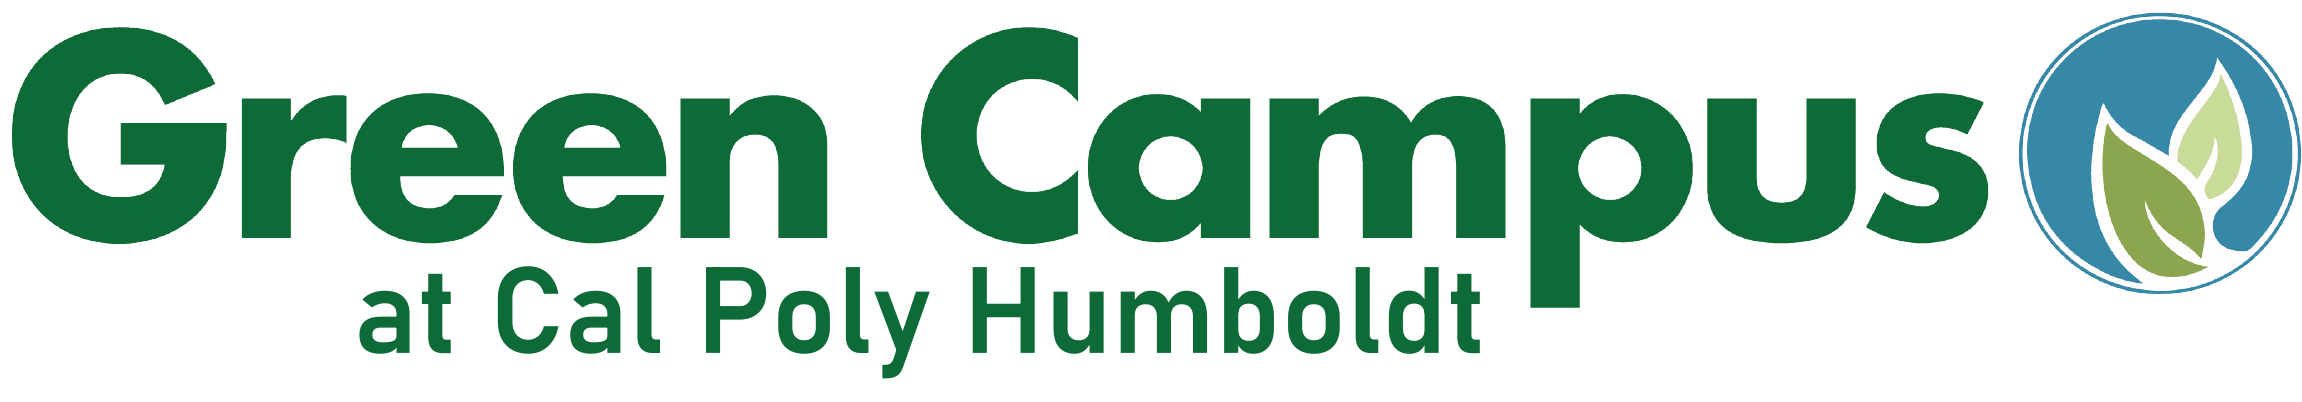 A rectangular image reading "Green Campus" in bolded, large, dark green letters with "at Cal Poly Humboldt" written below in dark green, smaller letters. A small, blue circle logo is to the right of the words and has two green leaves within it 